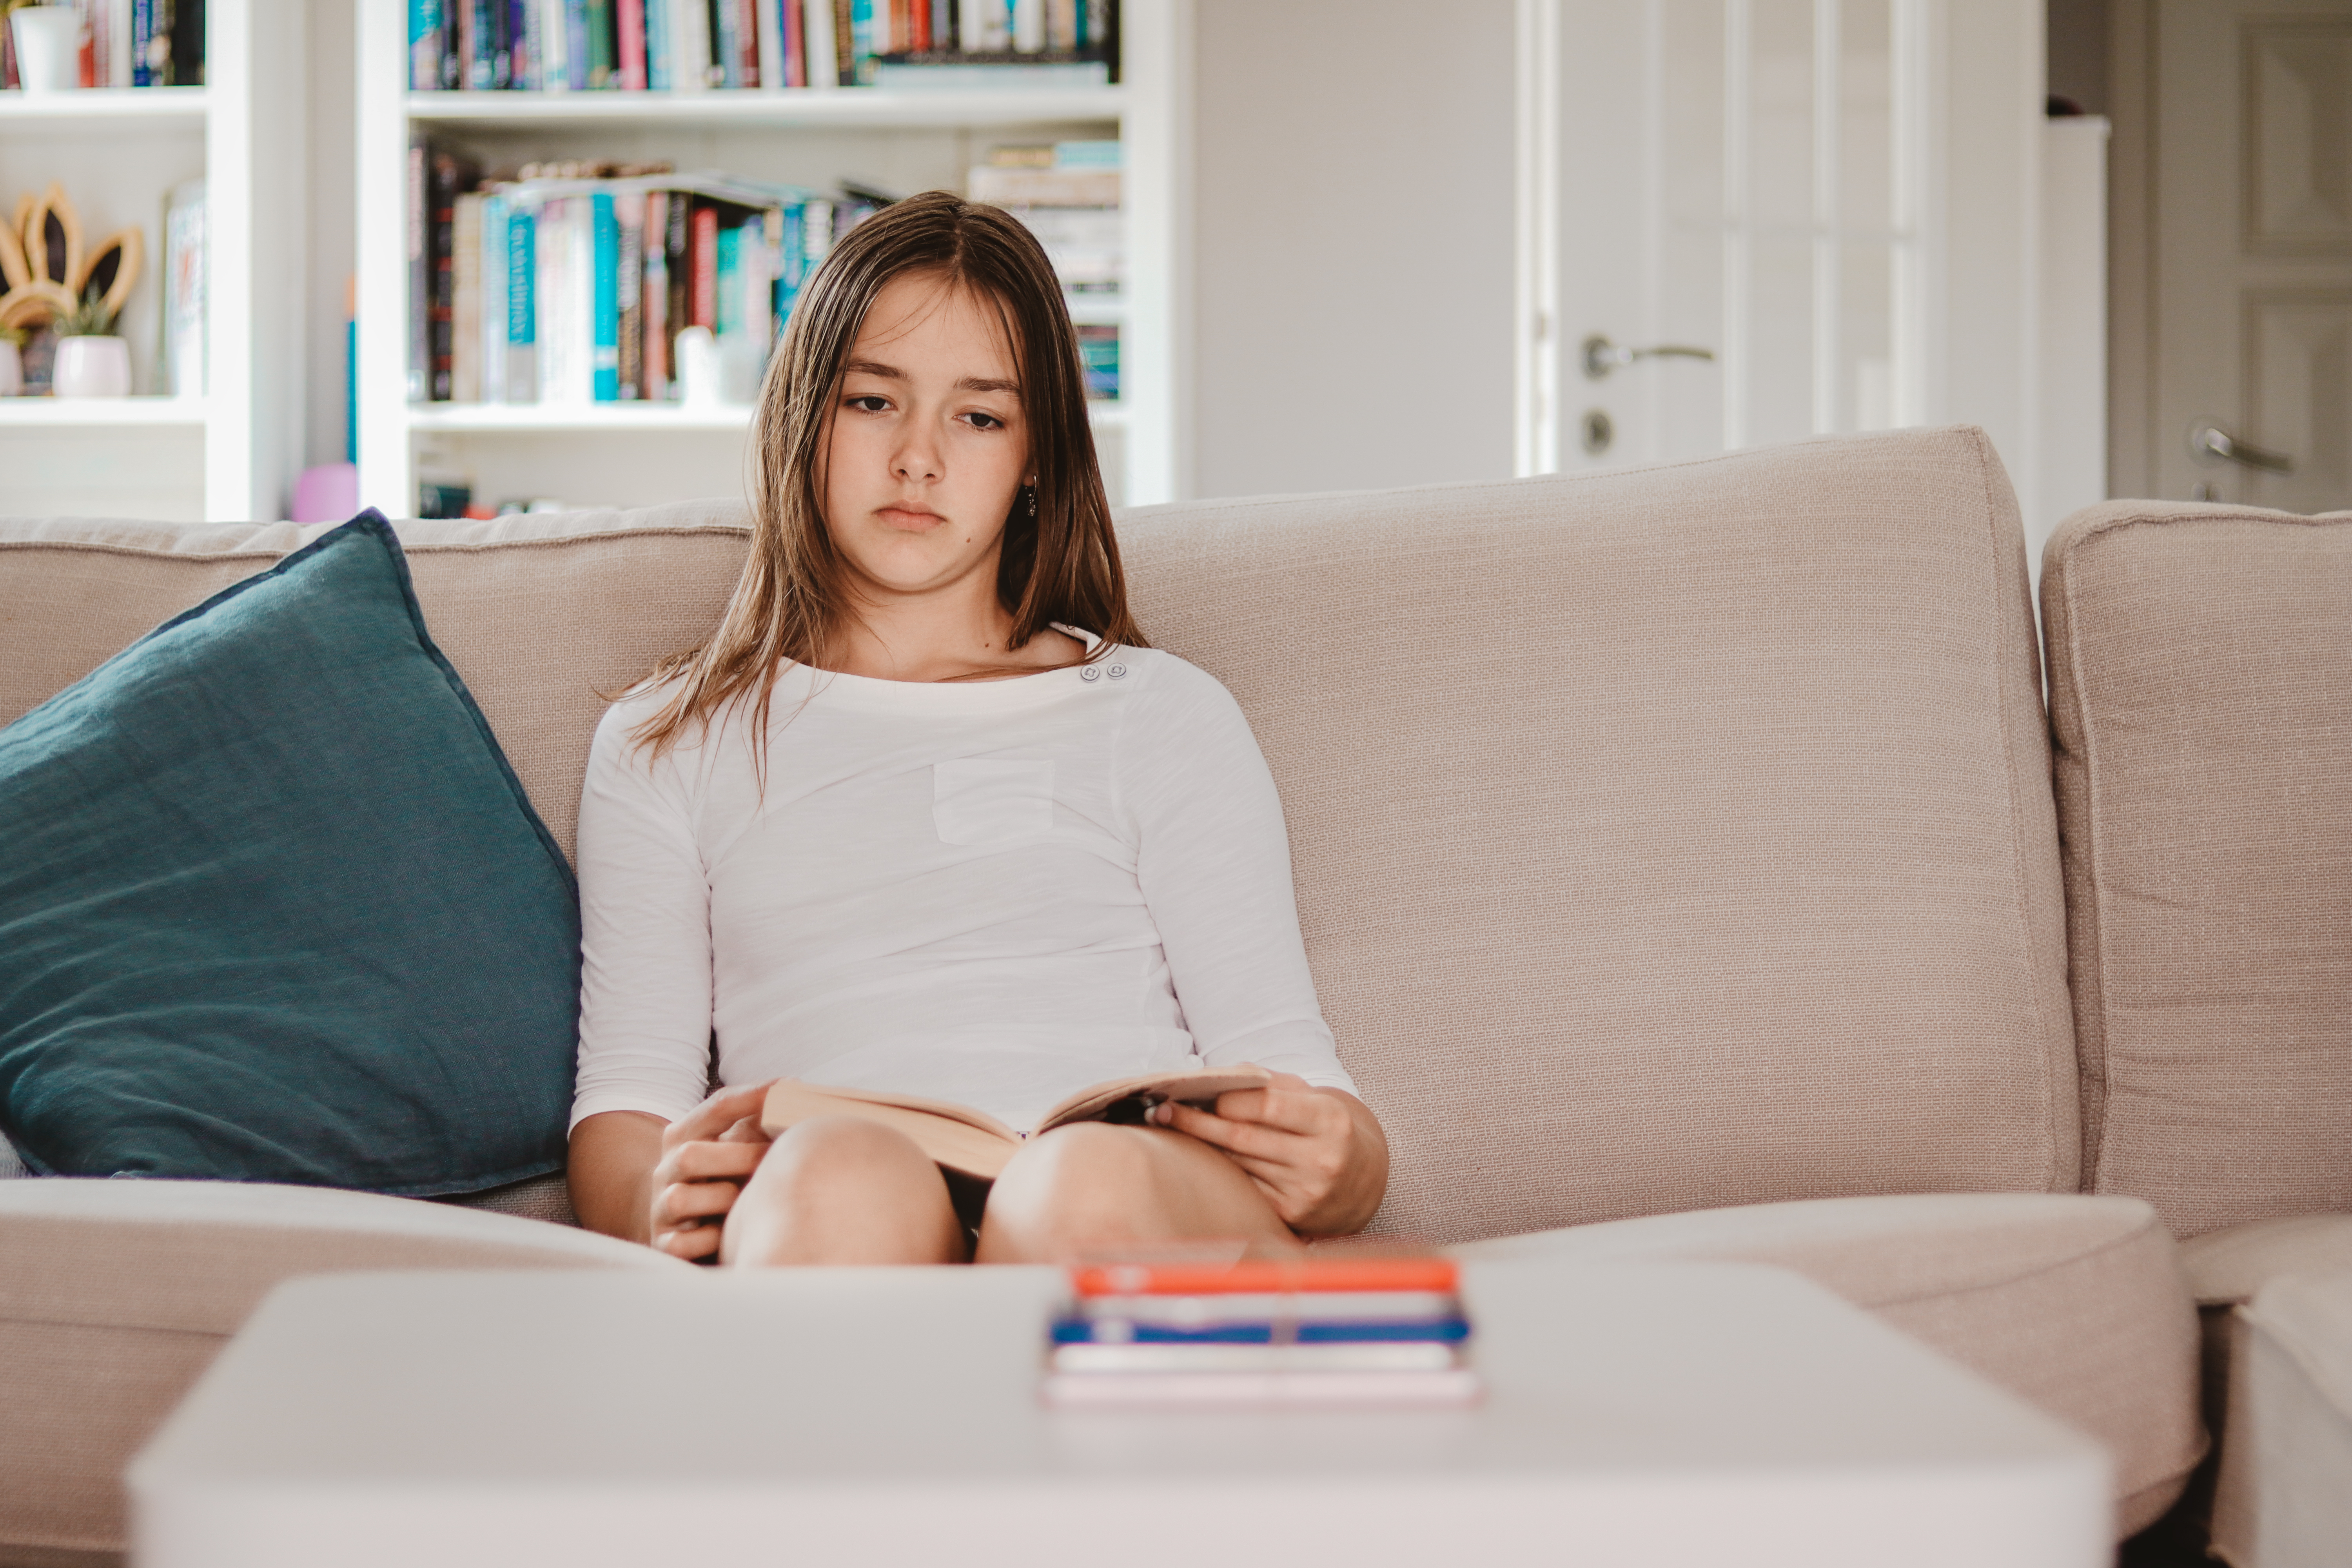 A young girl sitting on a couch looking sad | Source: Shutterstock